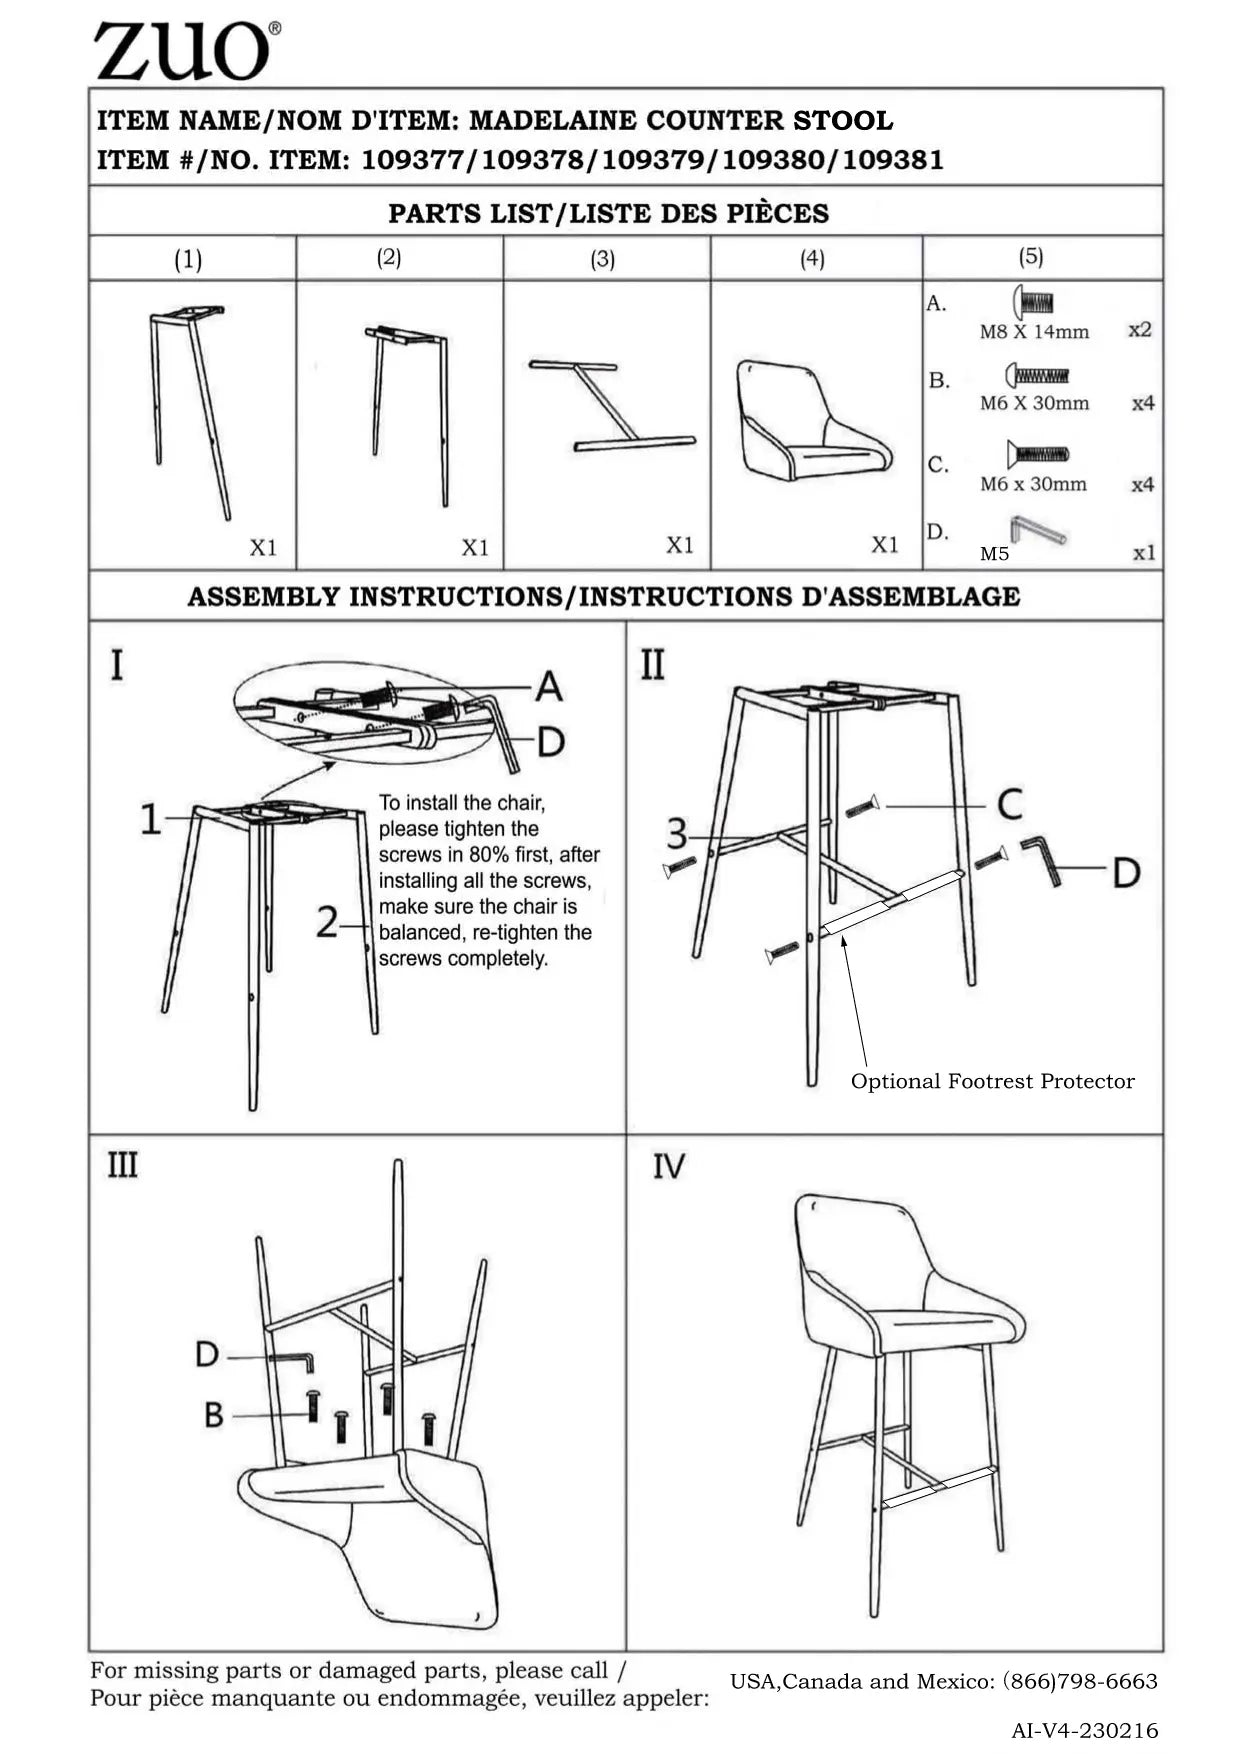 Assembly instructions of Counter Stool